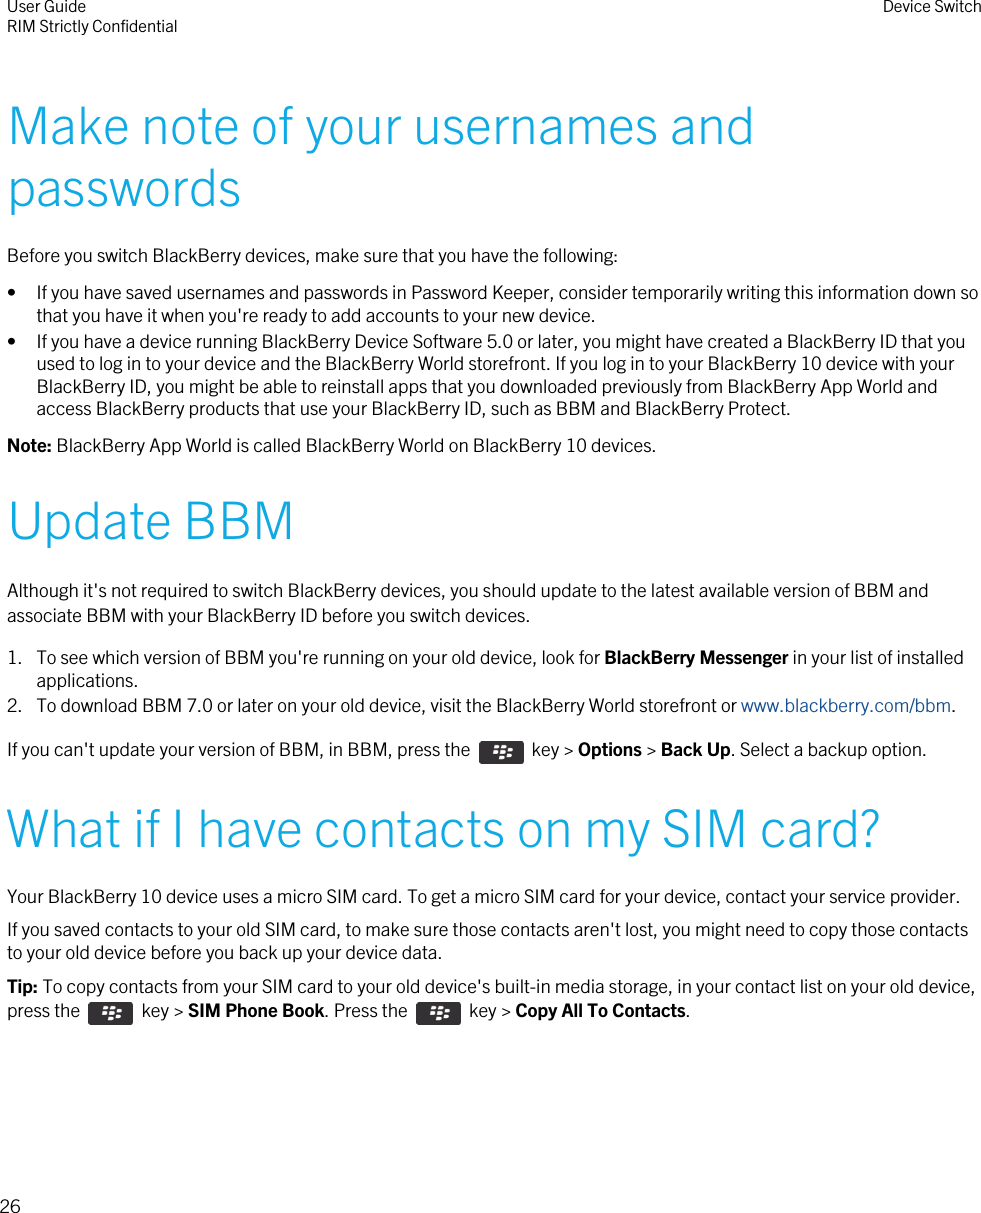 Make note of your usernames andpasswordsBefore you switch BlackBerry devices, make sure that you have the following:• If you have saved usernames and passwords in Password Keeper, consider temporarily writing this information down sothat you have it when you&apos;re ready to add accounts to your new device.• If you have a device running BlackBerry Device Software 5.0 or later, you might have created a BlackBerry ID that youused to log in to your device and the BlackBerry World storefront. If you log in to your BlackBerry 10 device with yourBlackBerry ID, you might be able to reinstall apps that you downloaded previously from BlackBerry App World andaccess BlackBerry products that use your BlackBerry ID, such as BBM and BlackBerry Protect.Note: BlackBerry App World is called BlackBerry World on BlackBerry 10 devices.Update BBMAlthough it&apos;s not required to switch BlackBerry devices, you should update to the latest available version of BBM andassociate BBM with your BlackBerry ID before you switch devices.1. To see which version of BBM you&apos;re running on your old device, look for BlackBerry Messenger in your list of installedapplications.2. To download BBM 7.0 or later on your old device, visit the BlackBerry World storefront or www.blackberry.com/bbm.If you can&apos;t update your version of BBM, in BBM, press the    key &gt; Options &gt; Back Up. Select a backup option.What if I have contacts on my SIM card?Your BlackBerry 10 device uses a micro SIM card. To get a micro SIM card for your device, contact your service provider.If you saved contacts to your old SIM card, to make sure those contacts aren&apos;t lost, you might need to copy those contactsto your old device before you back up your device data.Tip: To copy contacts from your SIM card to your old device&apos;s built-in media storage, in your contact list on your old device,press the    key &gt; SIM Phone Book. Press the    key &gt; Copy All To Contacts.User GuideRIM Strictly Confidential Device Switch26